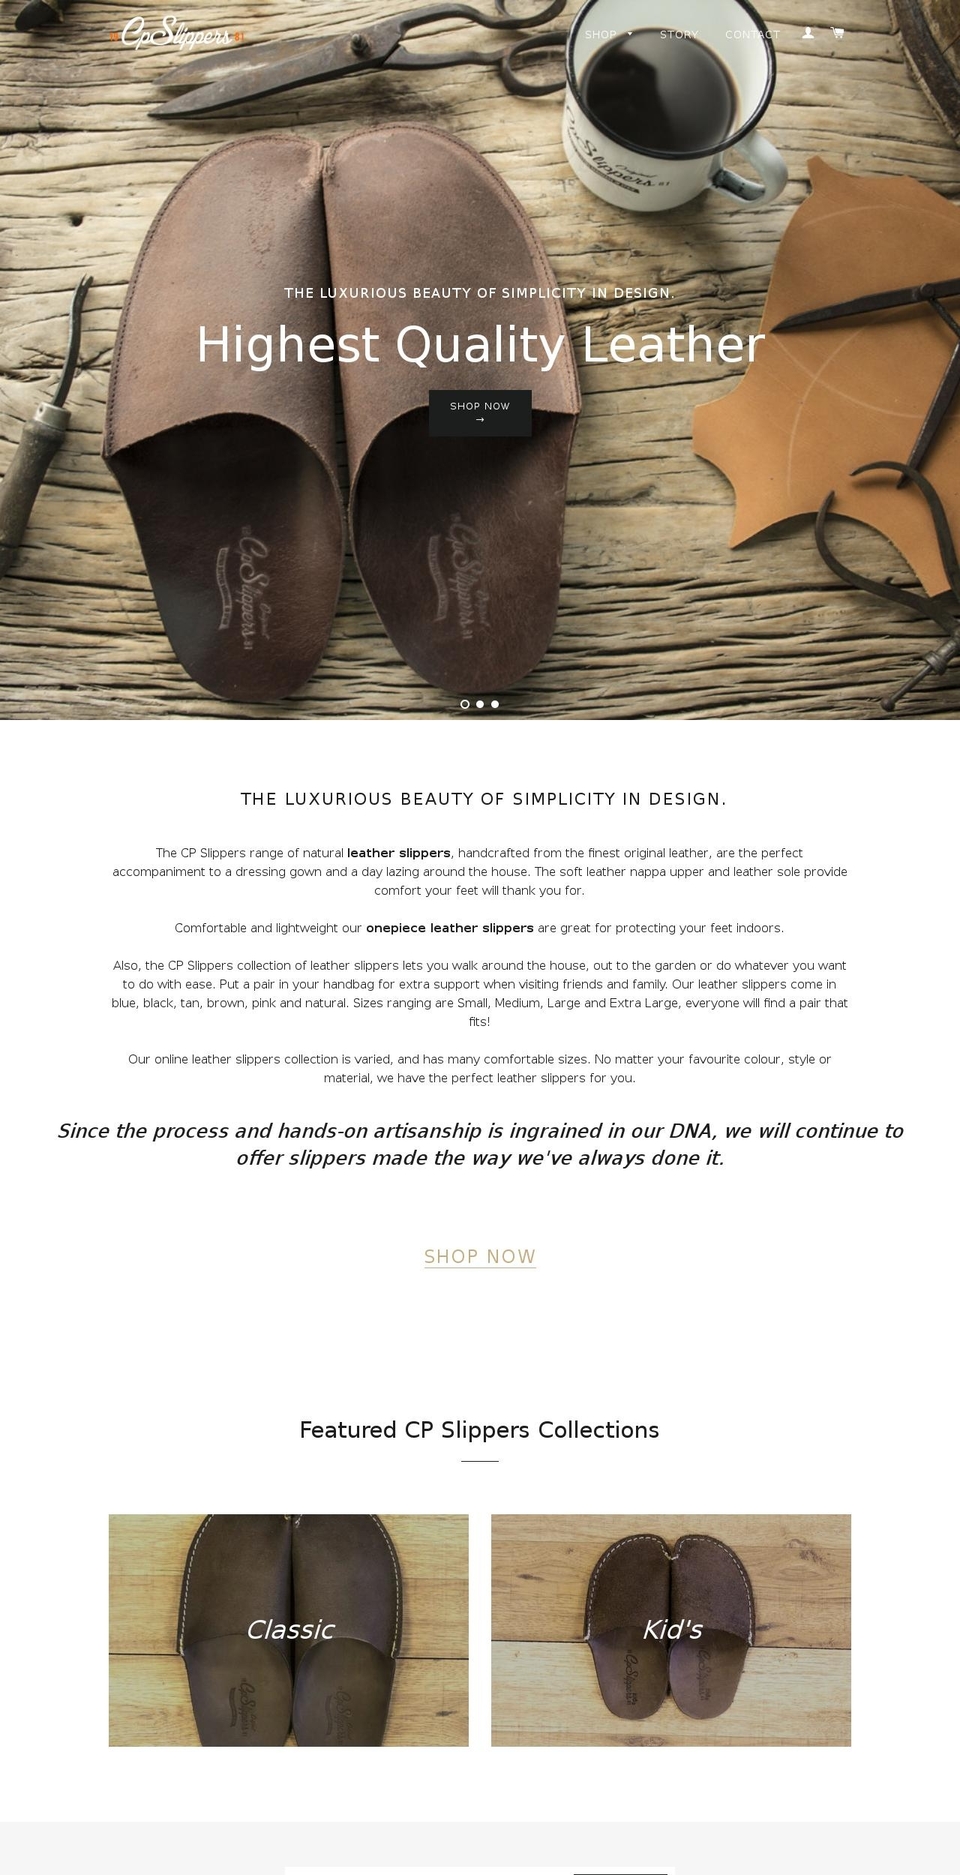 Craft Shopify theme site example cpslippers.com